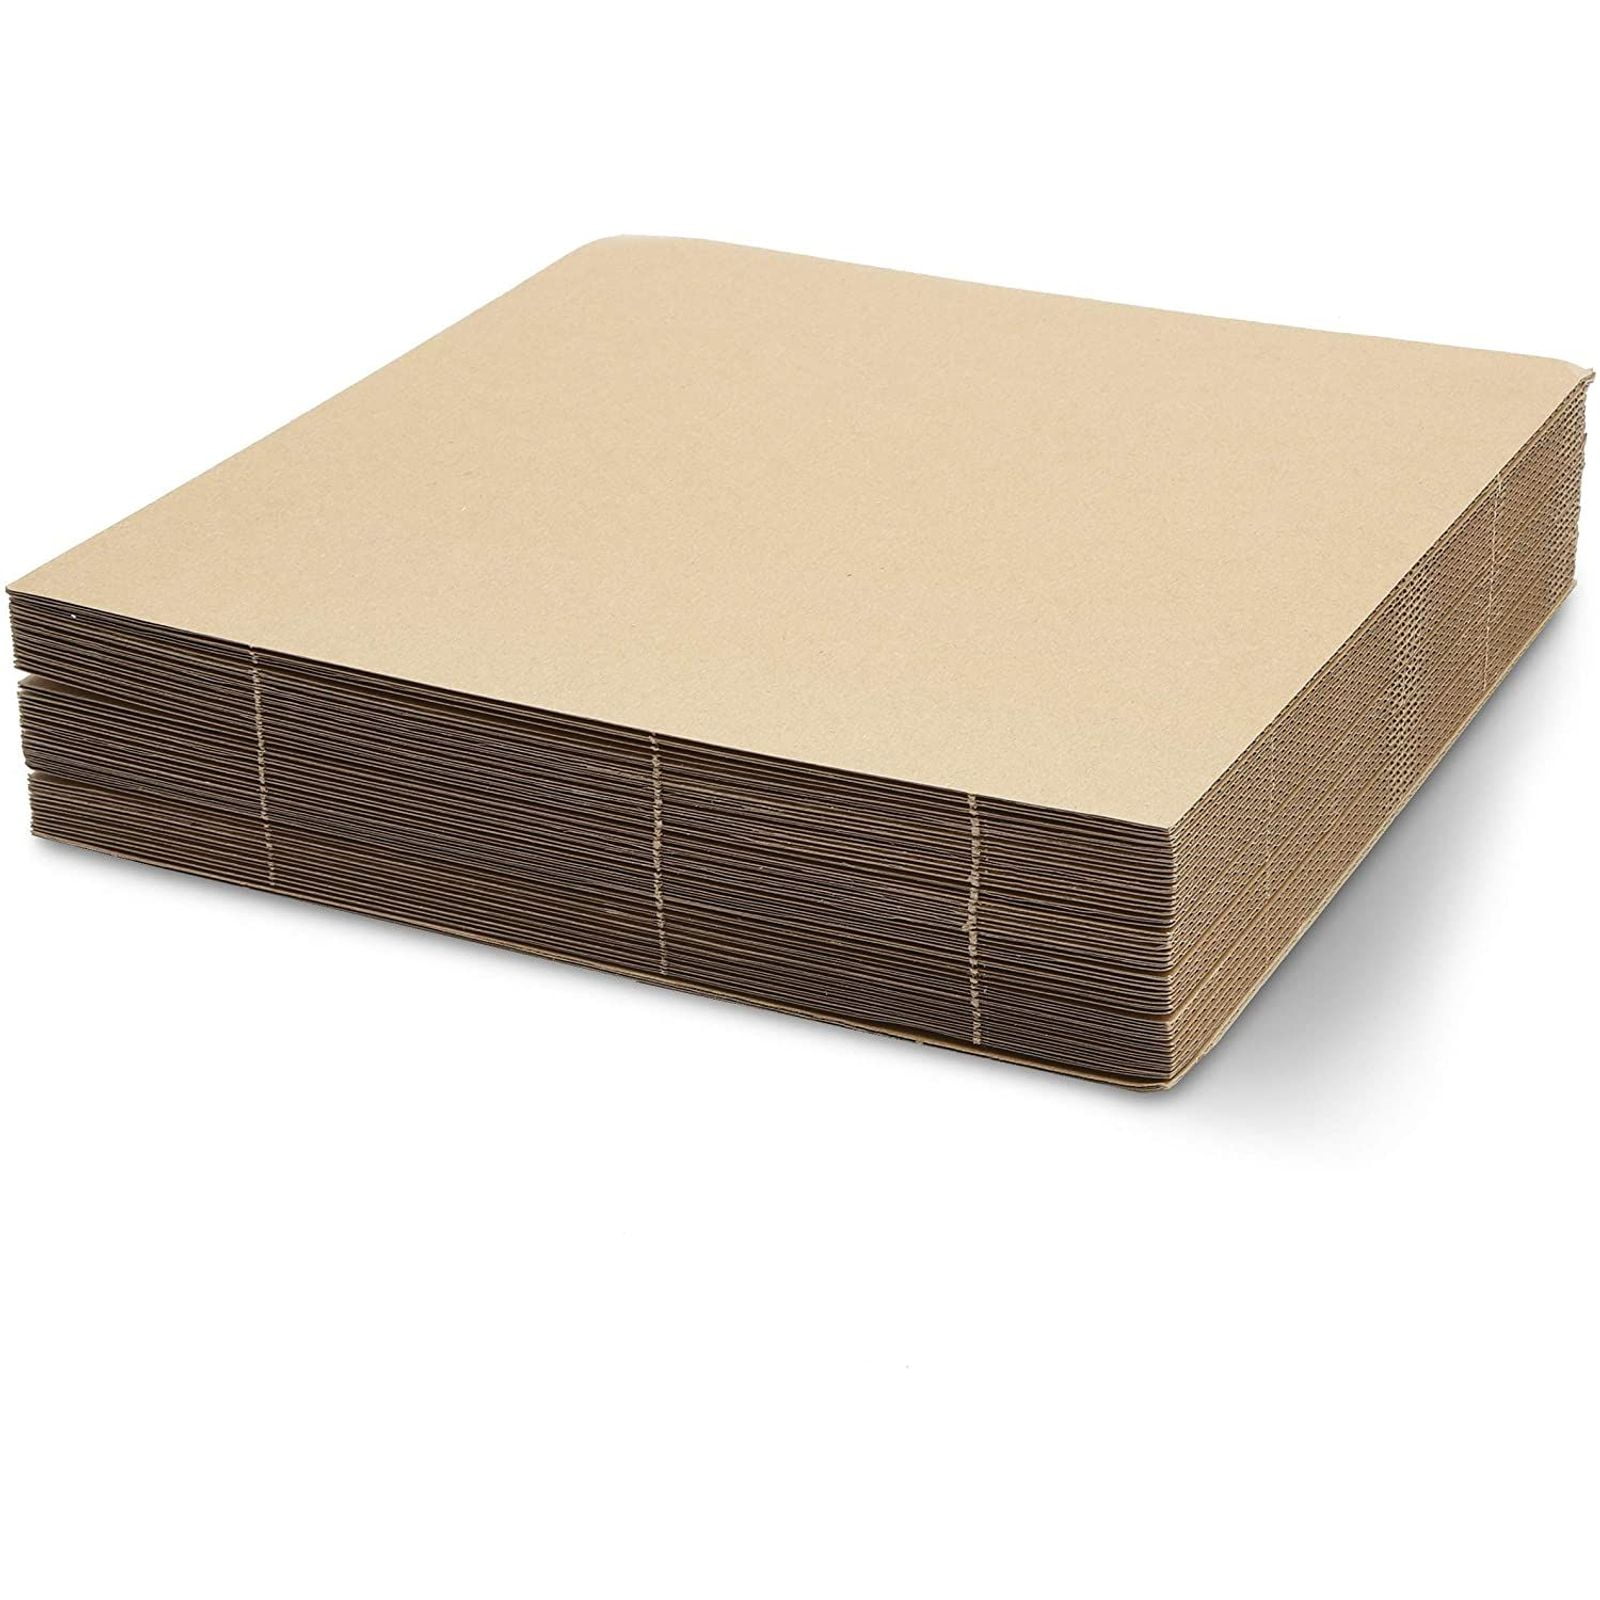 12 x 12 Inches for Packing Corrugated Cardboard Filler Insert Sheet Pads 1/8 Thick mailing and Crafts 25 Pack 